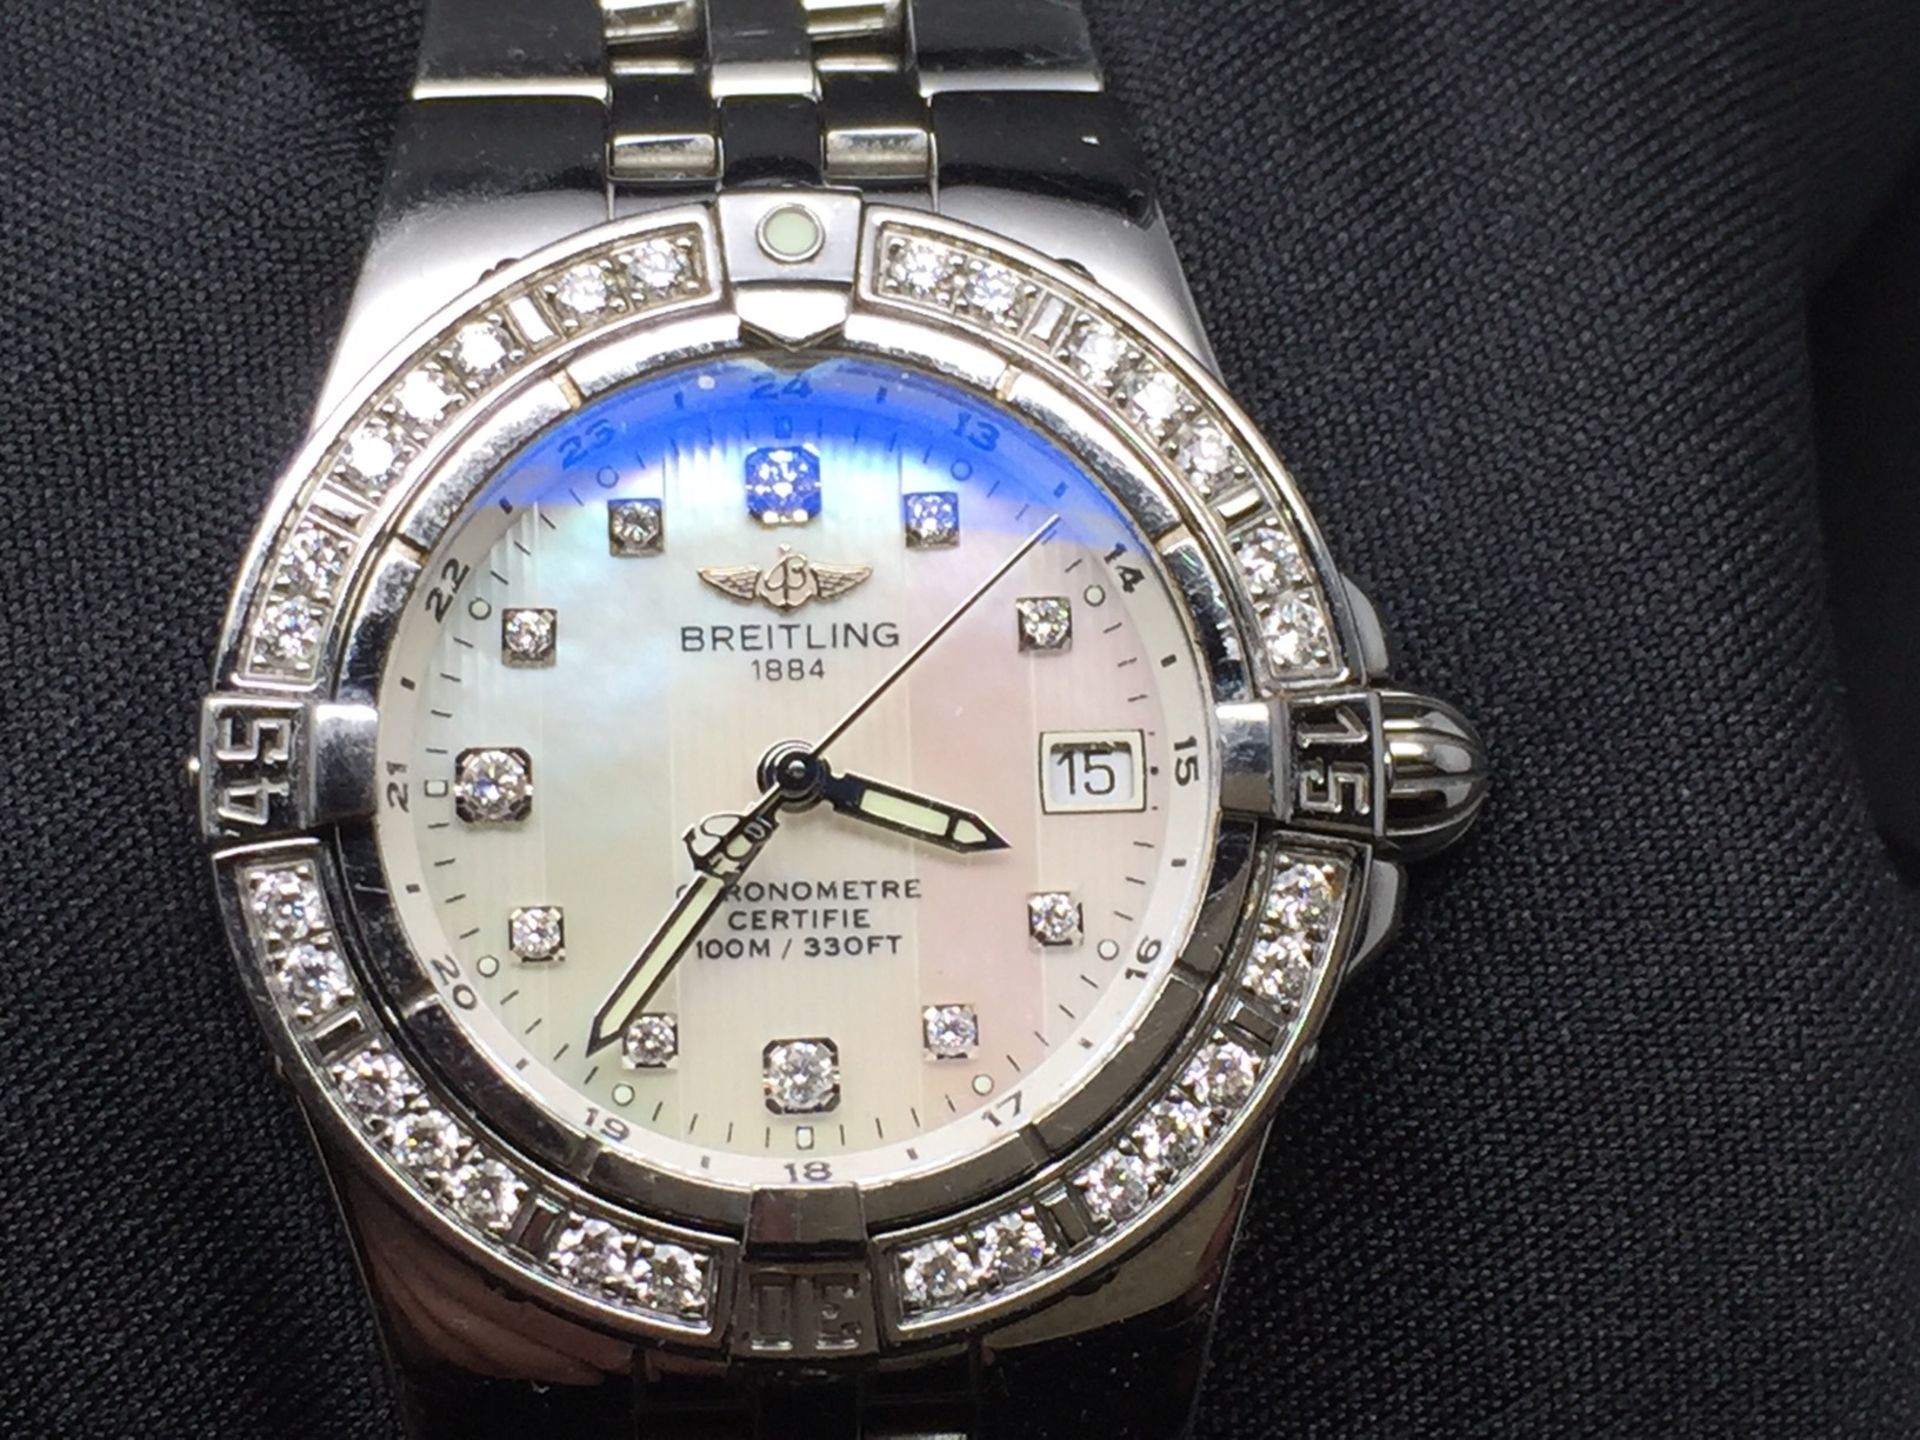 LADIES BREITLING DIAMOND WATCH * STARLINER A7134053 / A602